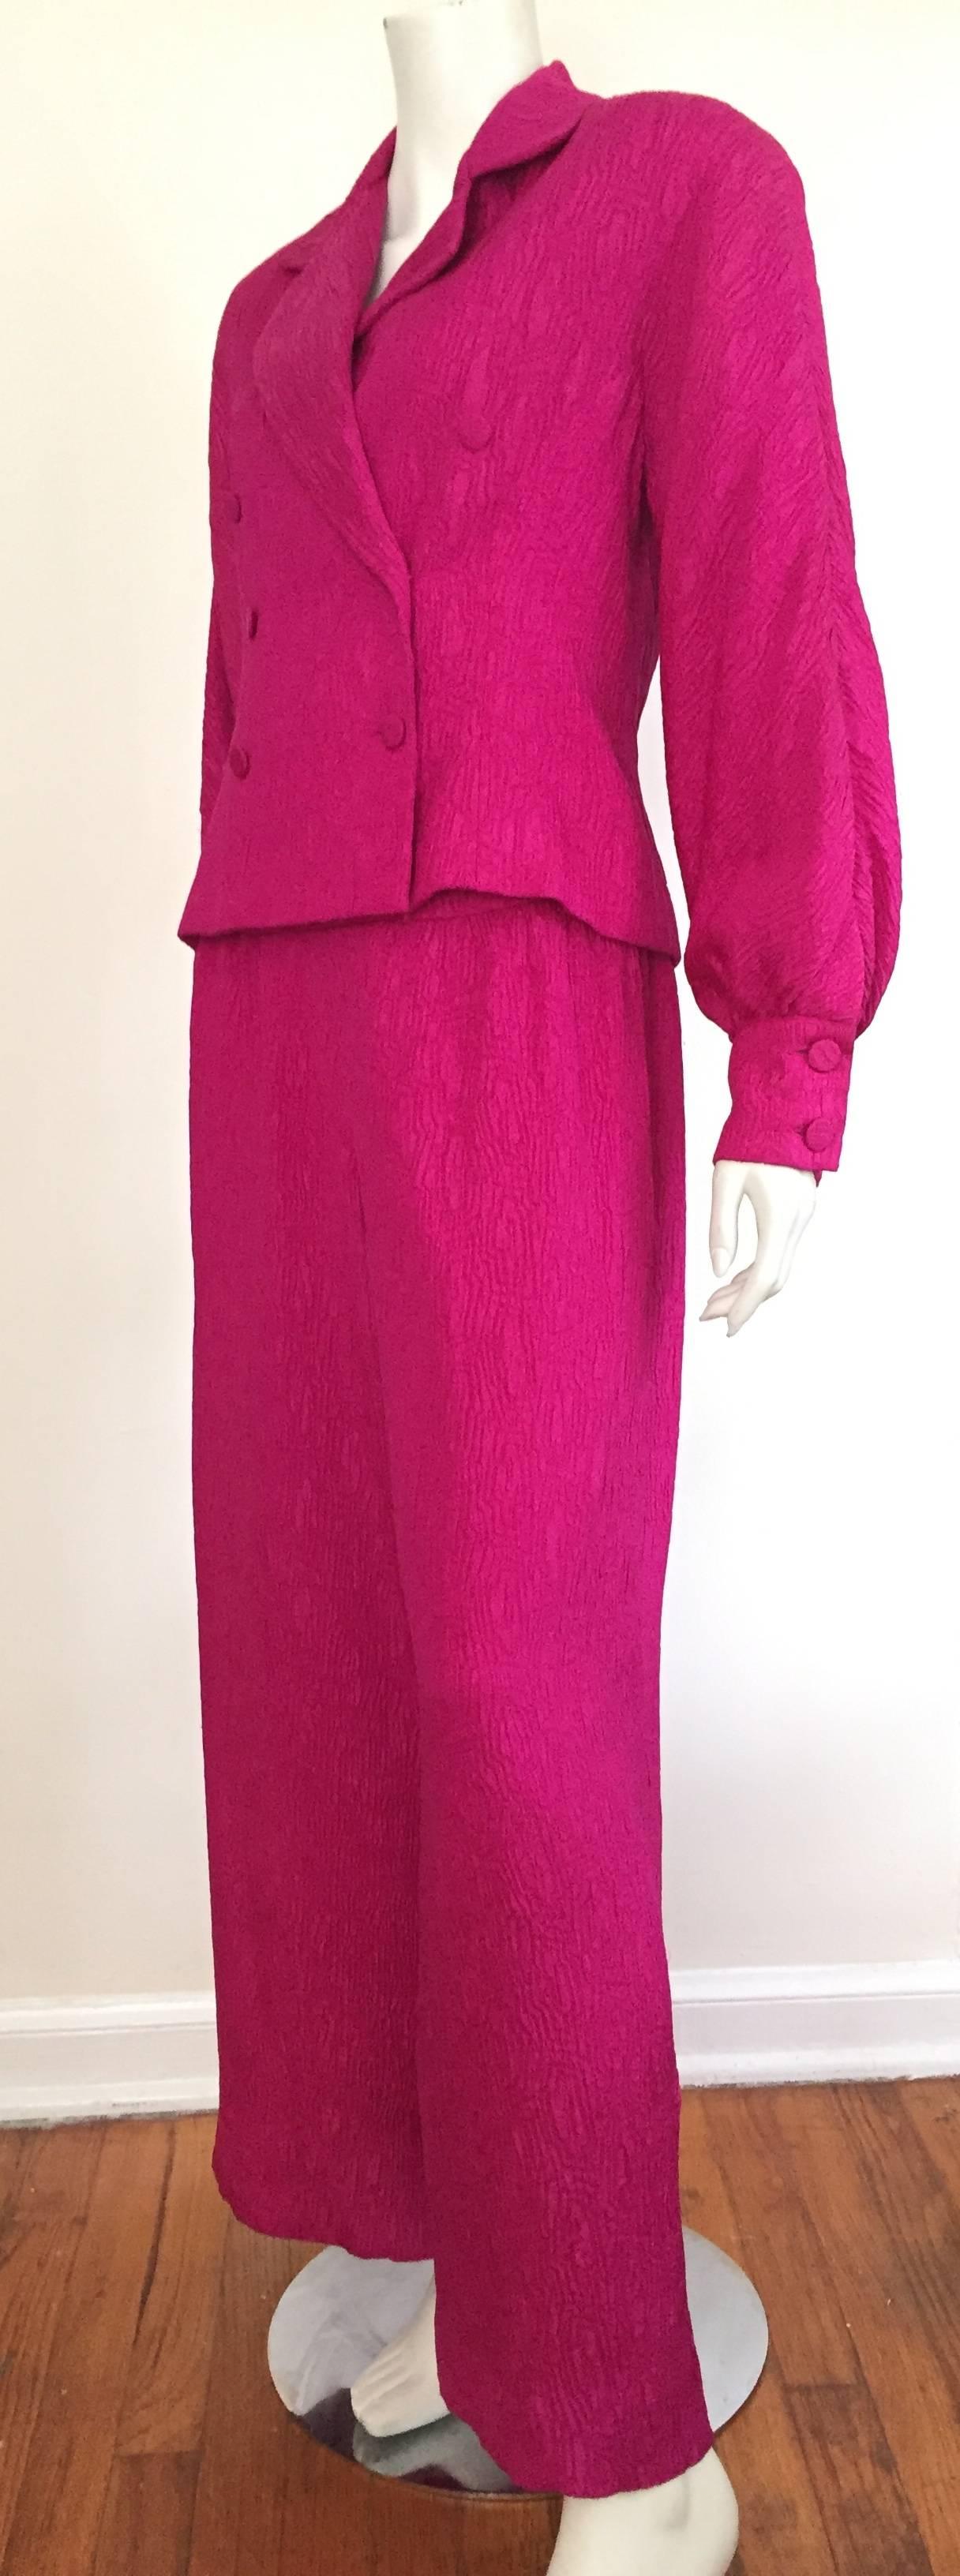 Adele Simpson Silk Pink Jacket and Palazzo Pants Size 6, 1980s For Sale 3